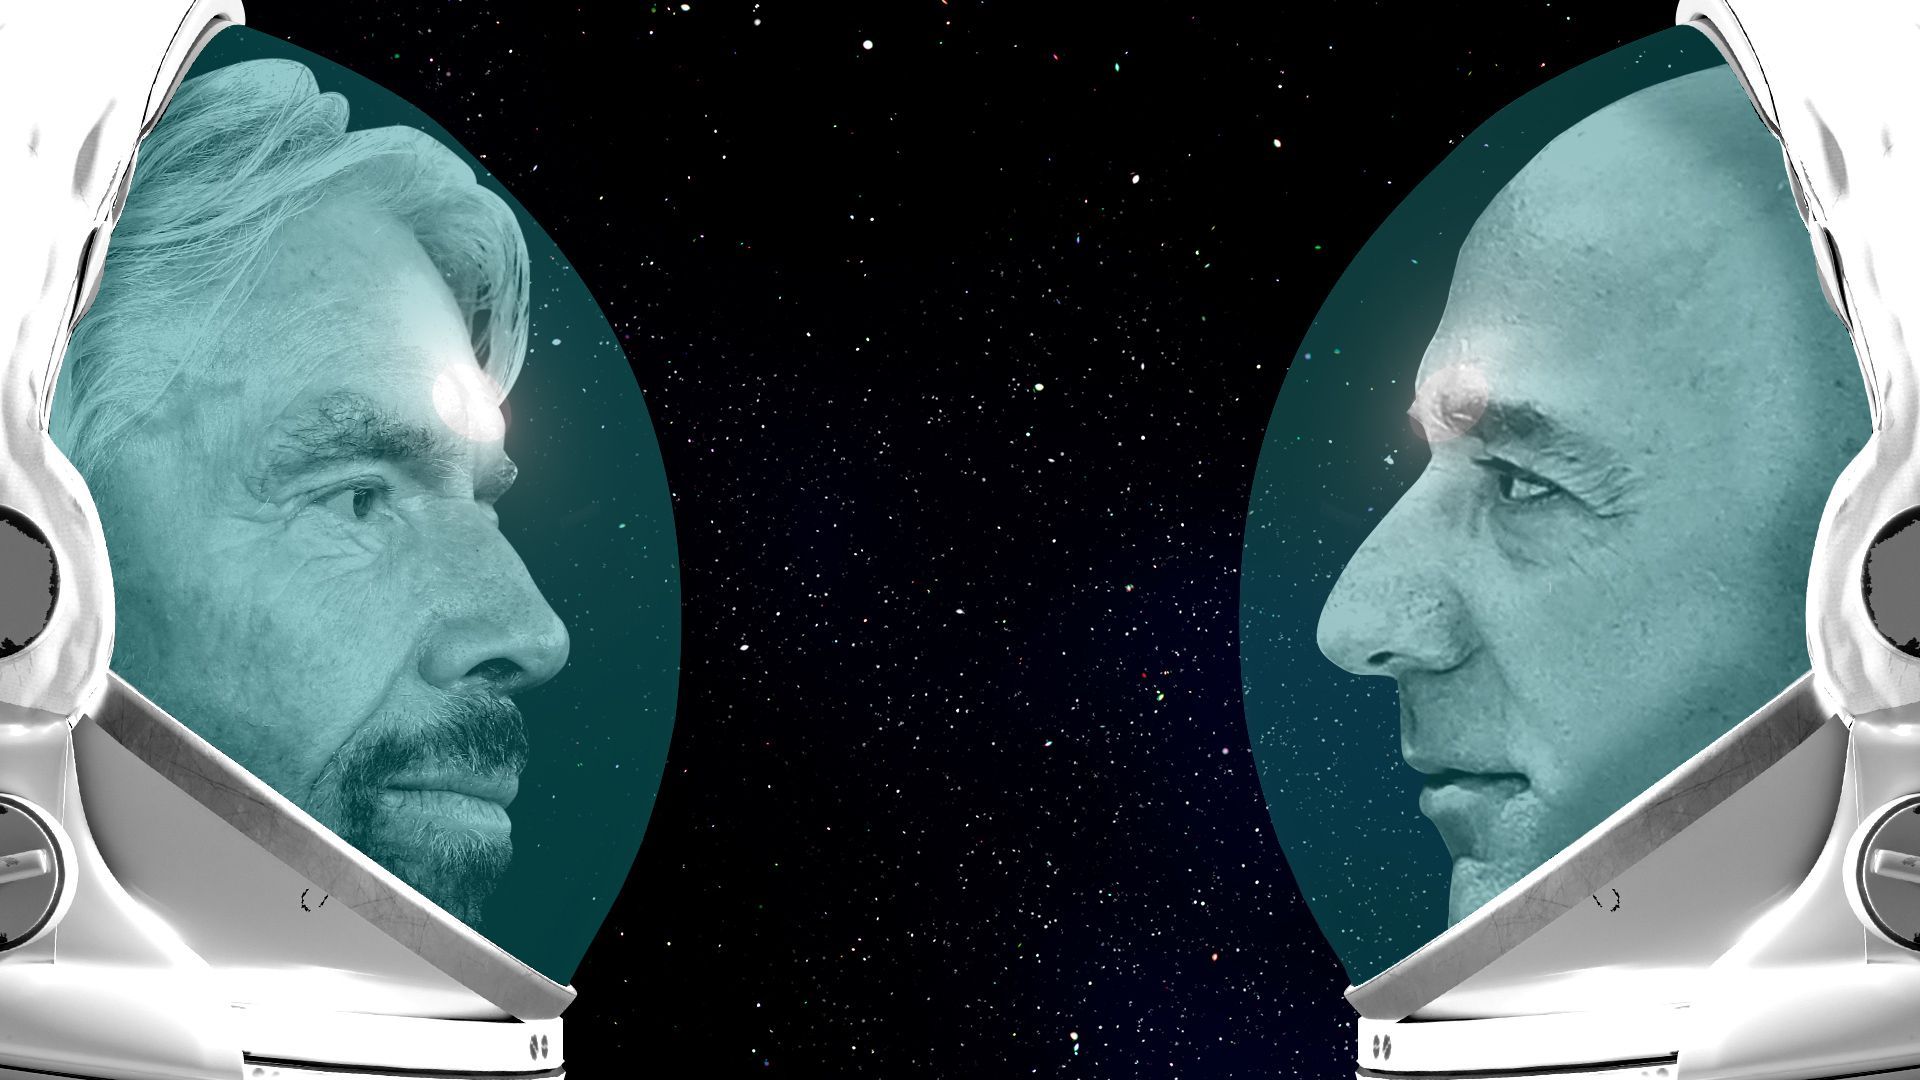 Photo illustration of Richard Branson and Jeff Bezos in astronaut helmets facing off against a space background. 